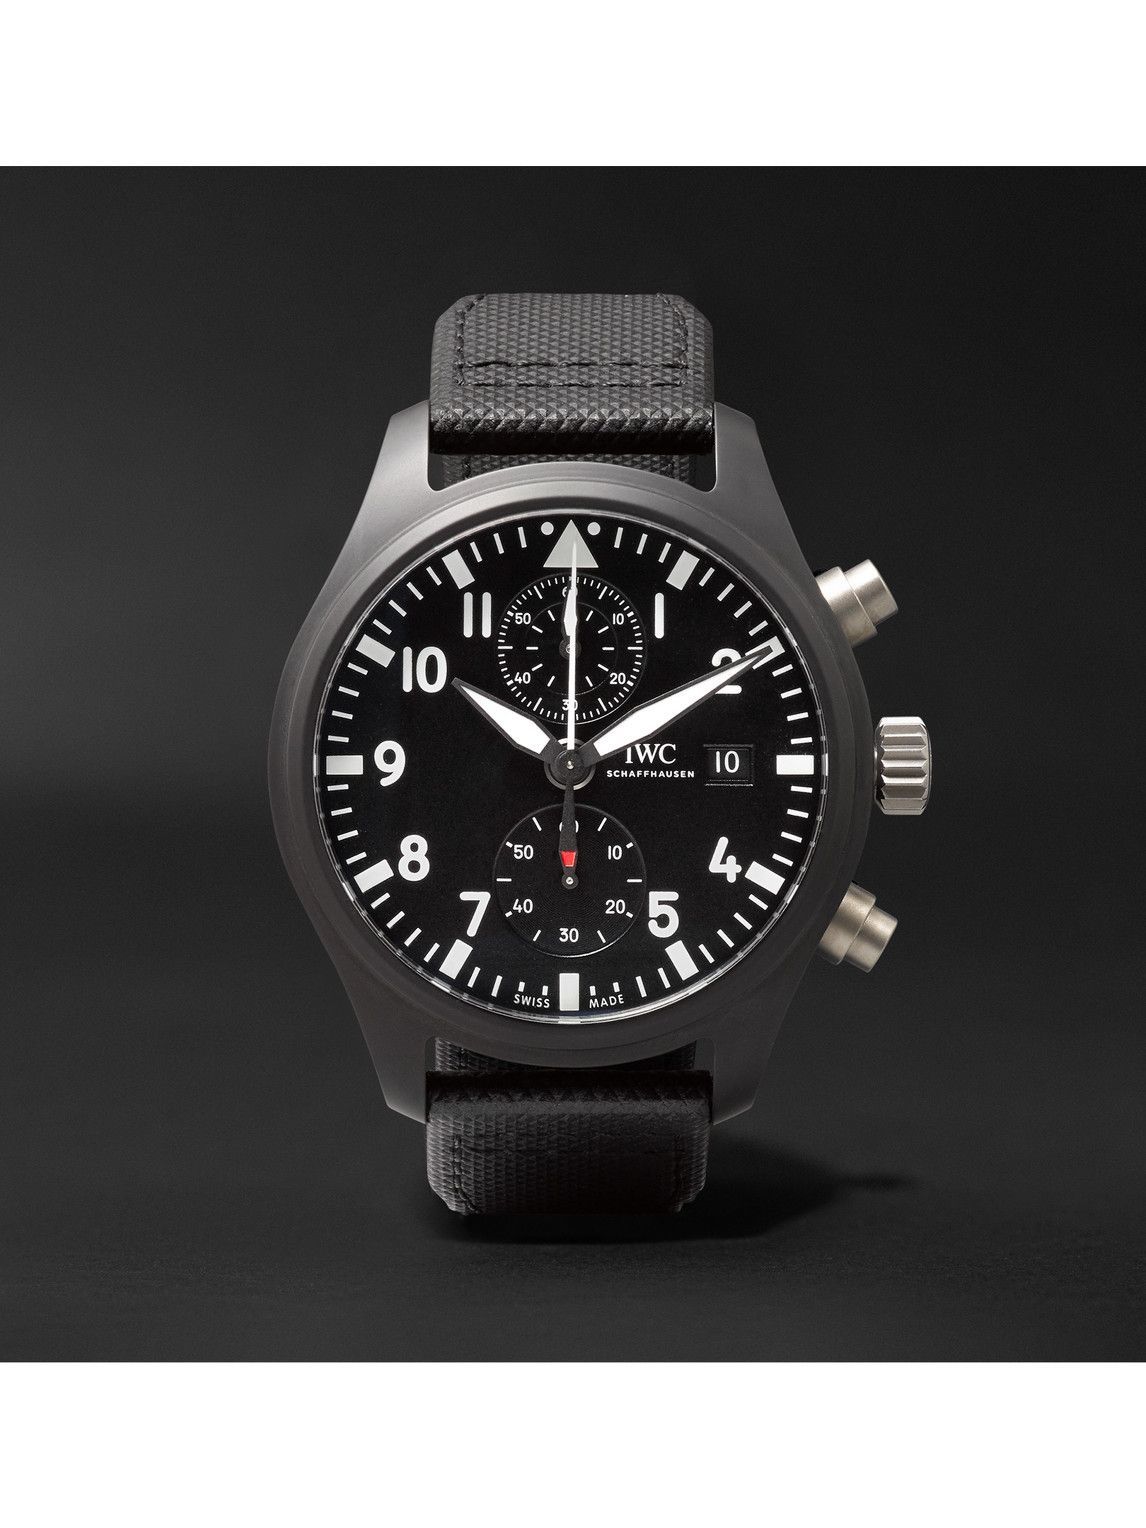 Photo: IWC Schaffhausen - Pilot's TOP GUN Automatic Chronograph 44mm Ceramic and Leather Watch, Ref. No. IW389001